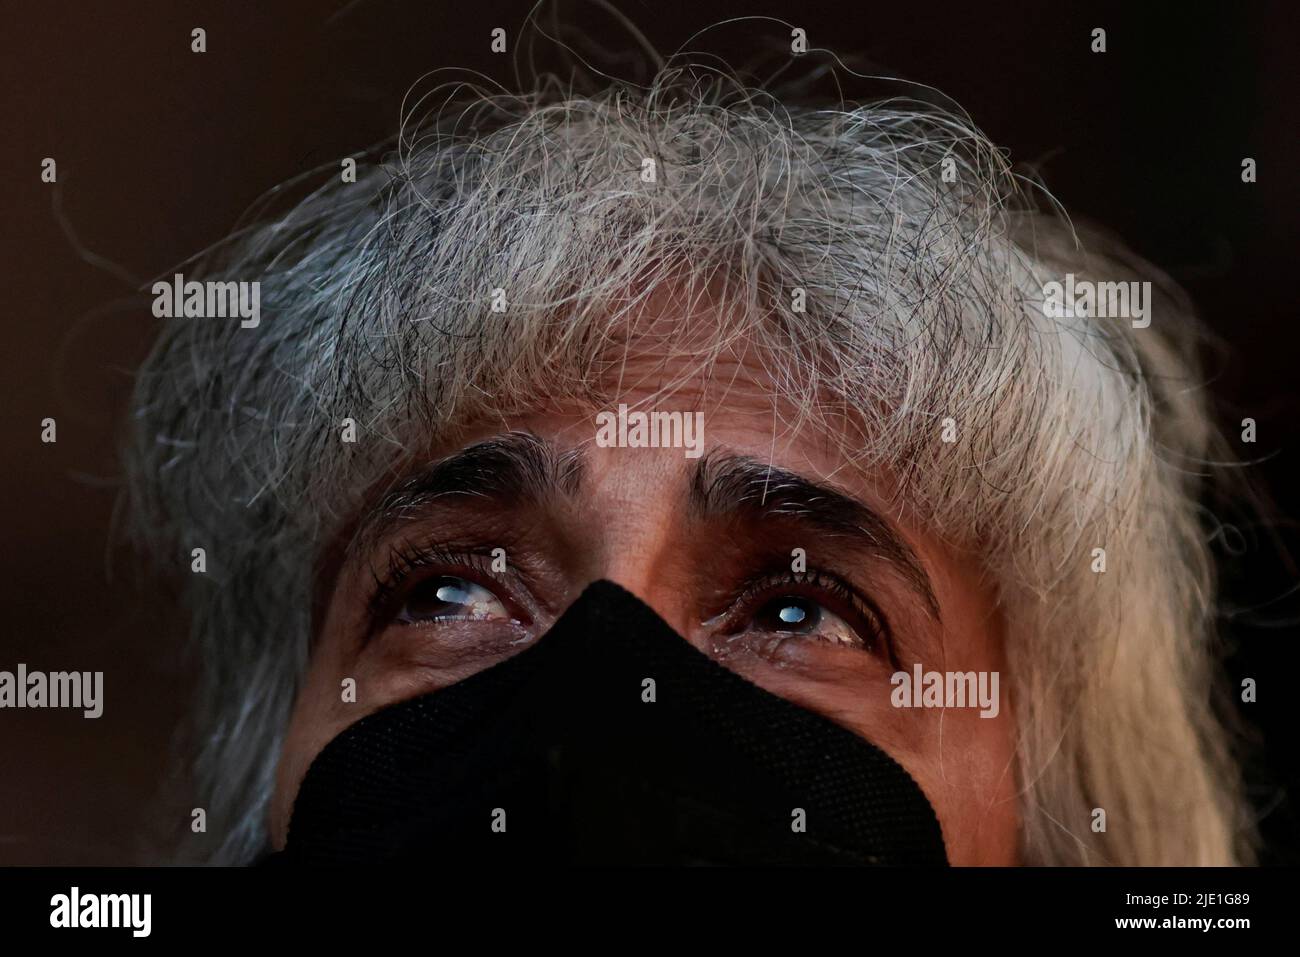 A woman reacts during an ecumenical act organized in honor of the indigenous expert Bruno Pereira and journalist Dom Phillips, who were murdered in the Amazon, in Brasilia, Brazil June 24, 2022. REUTERS/Ueslei Marcelino Stock Photo